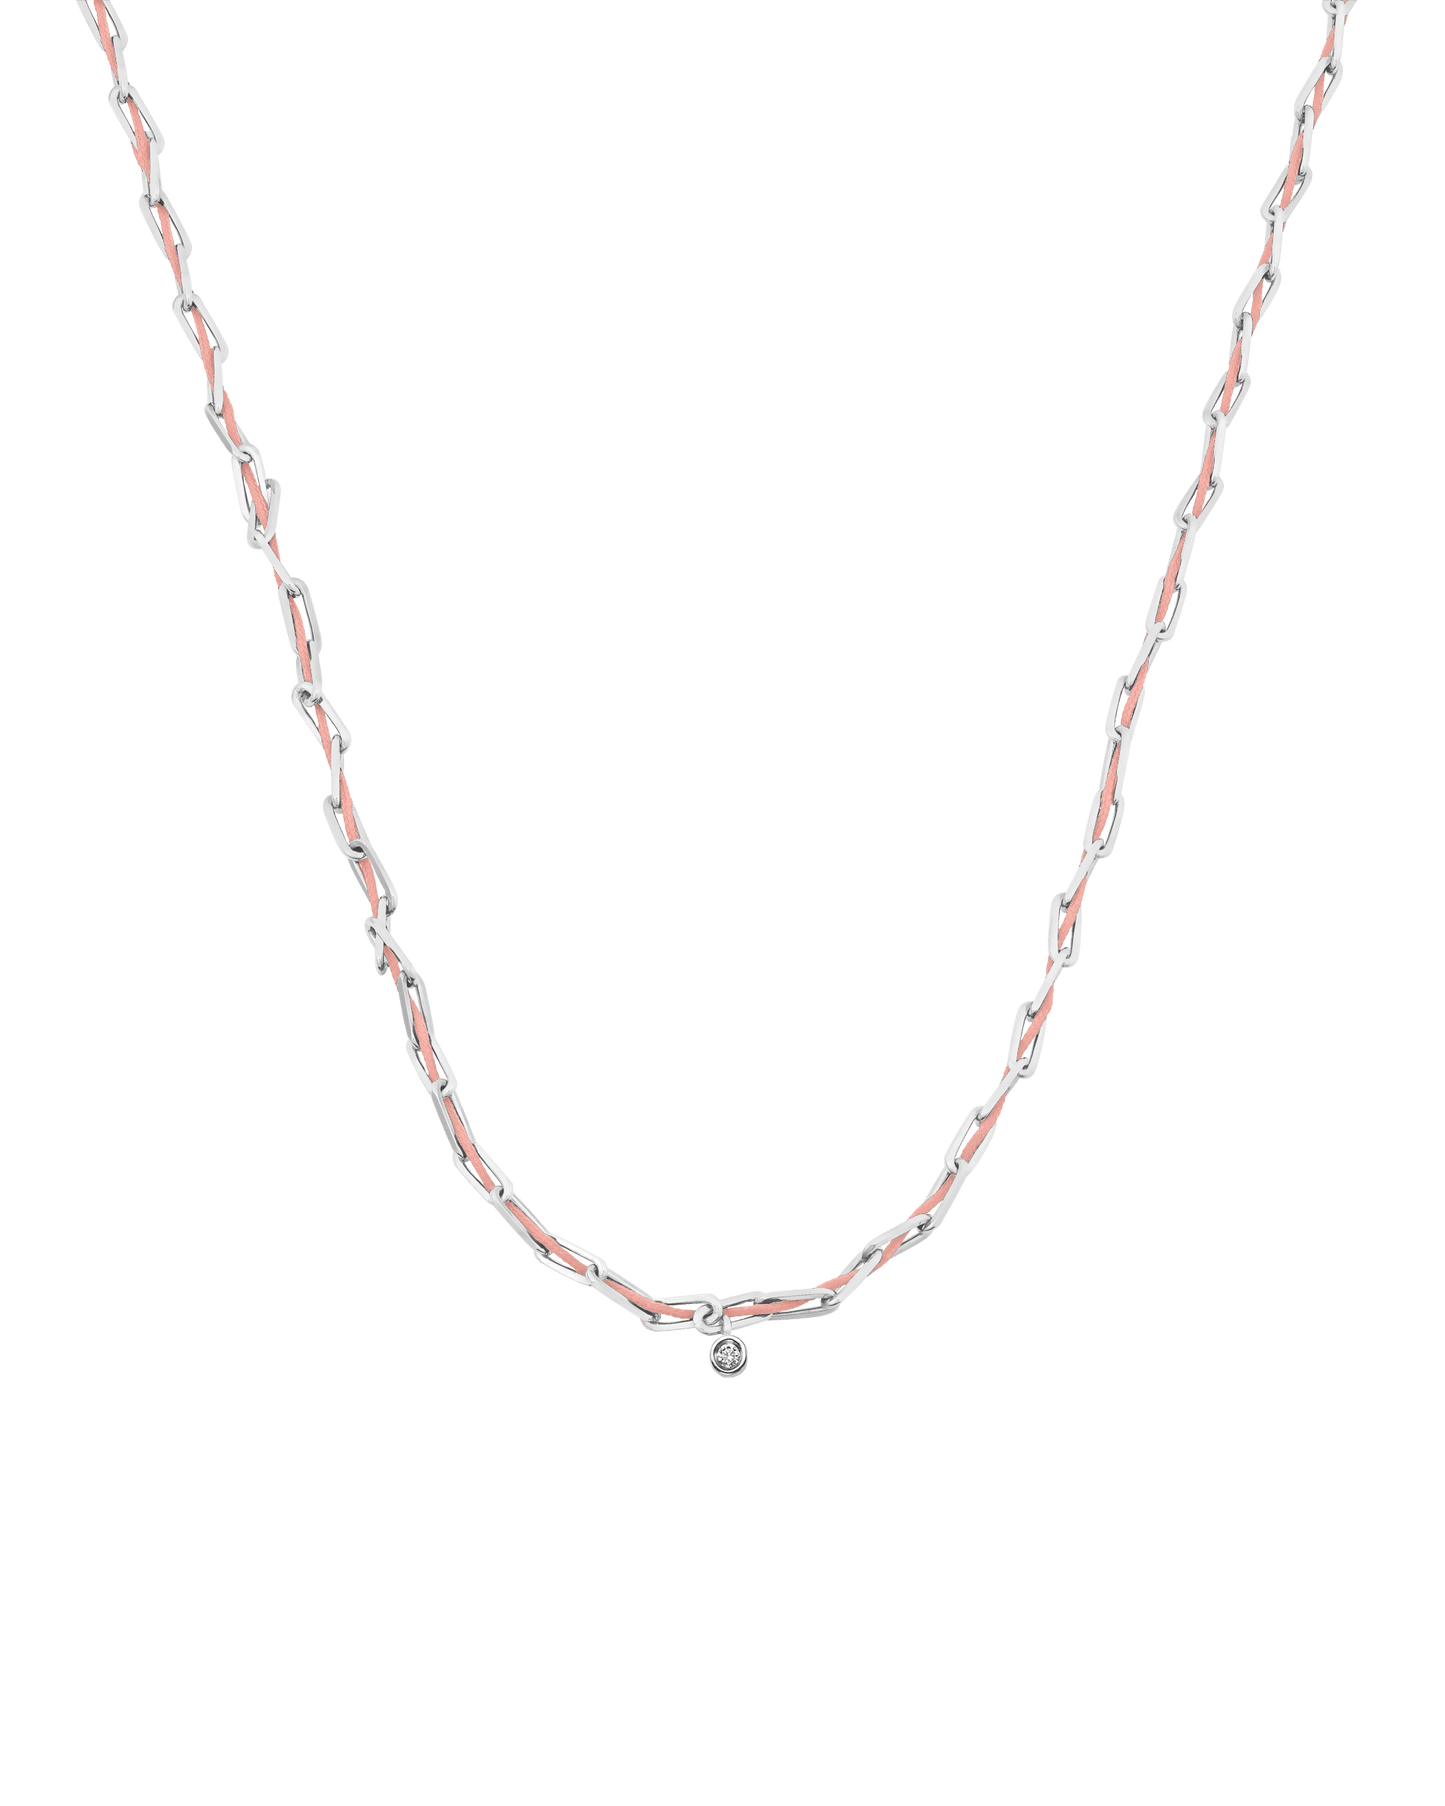 Pink : Twine Diamond Necklace - 925 Sterling Silver Necklaces magal-dev Flamingo Small: 0.03ct 16"